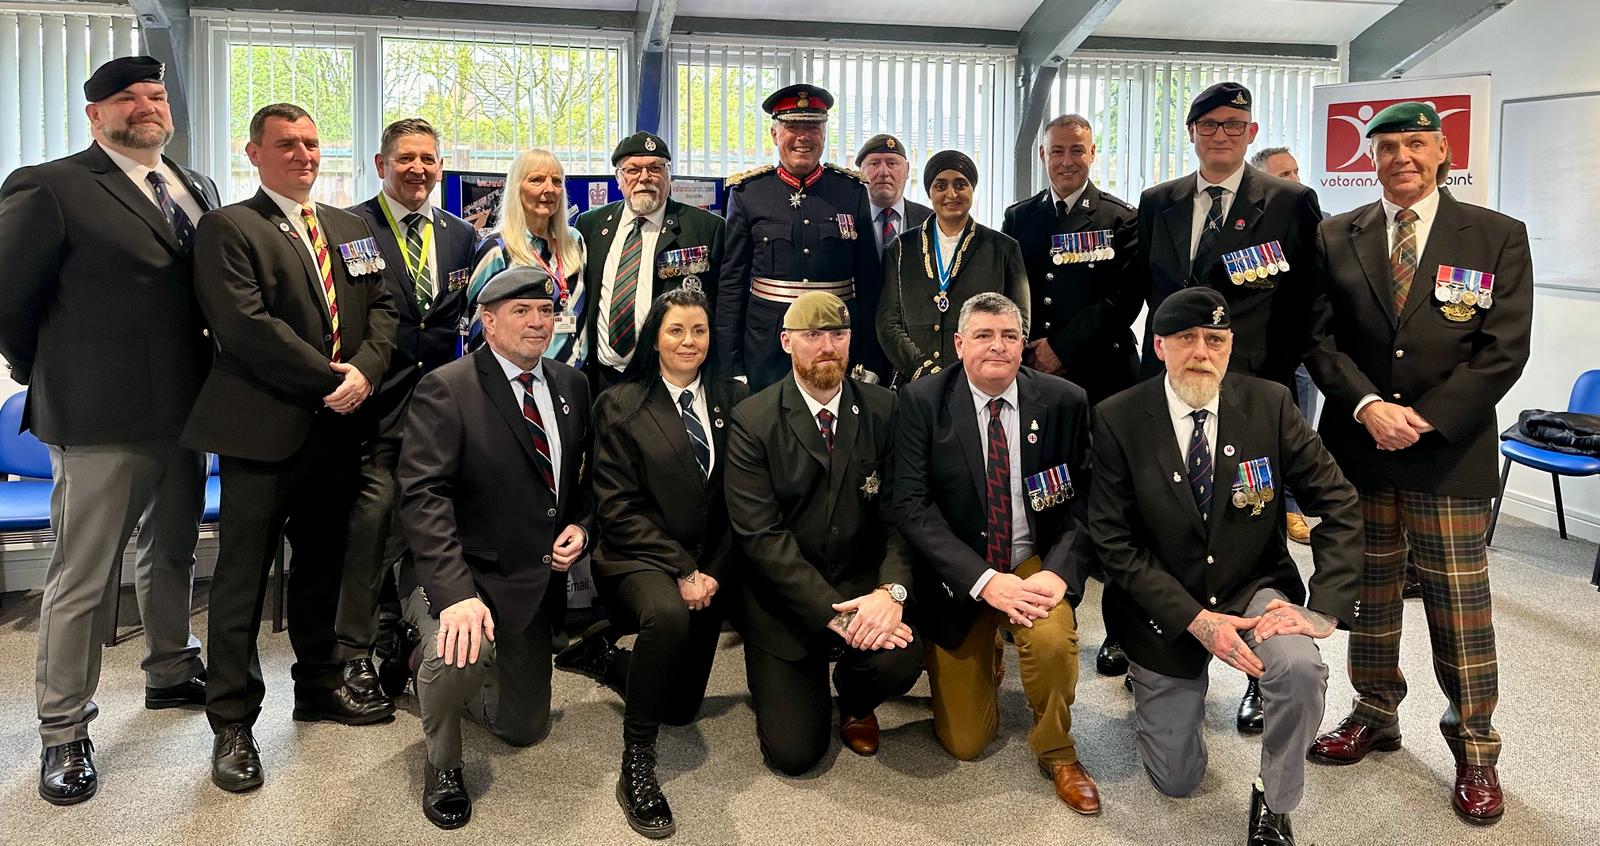 Members of the Veterans Contact Point receive their Kings Award for Voluntary Service from Tim Cox, Lord Lieutenant of Warwickshire accompanied by Rajvinder Kaur Gill, High Sheriff of Warwickshire.